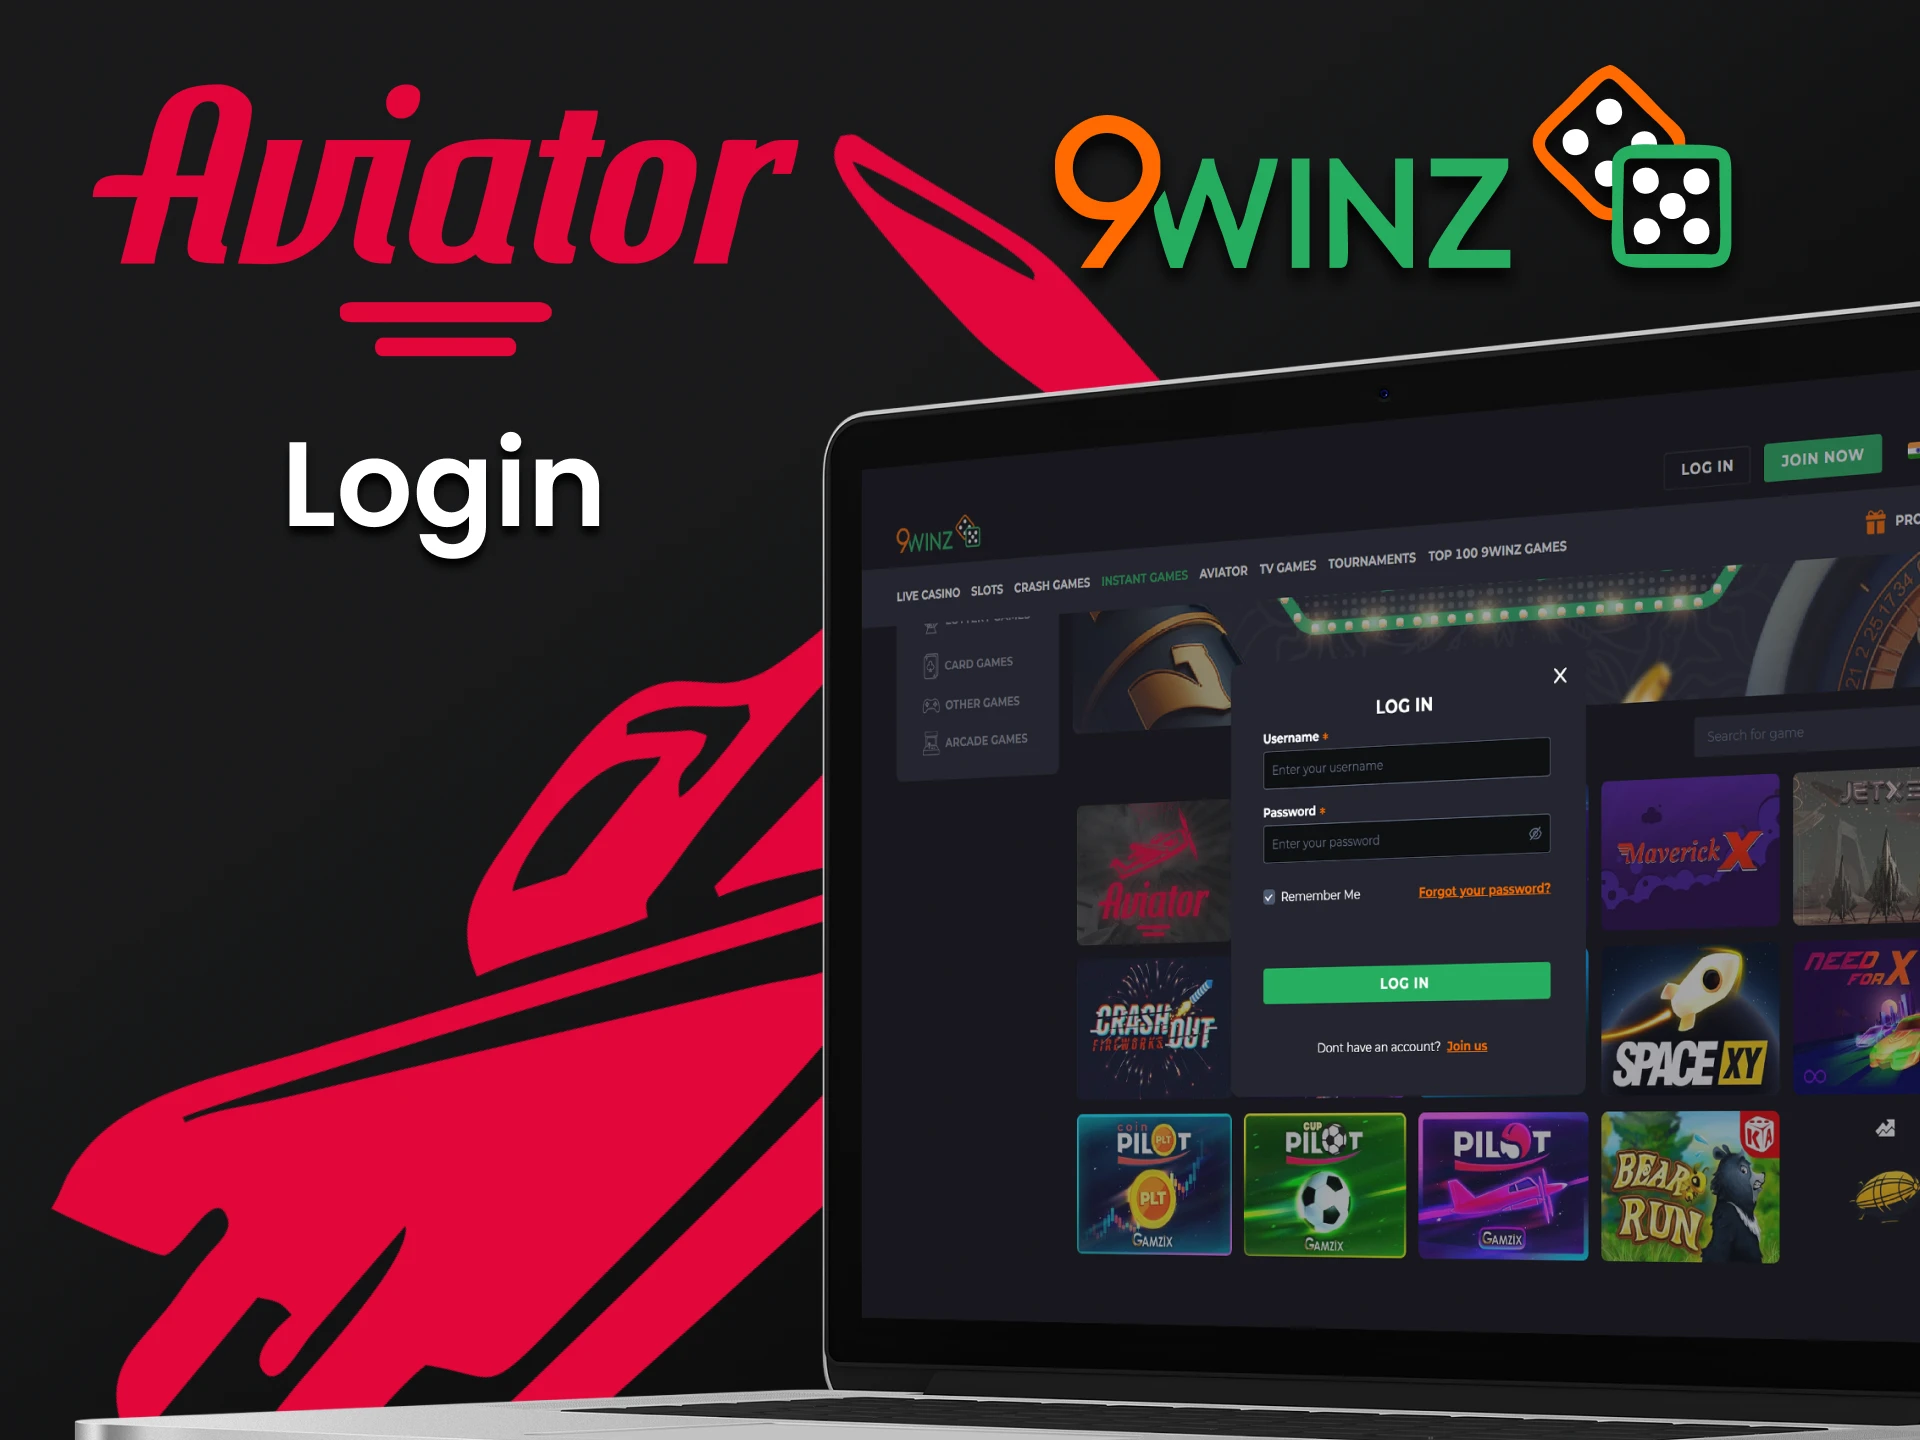 Sign in to your 9winz account to play Aviator.